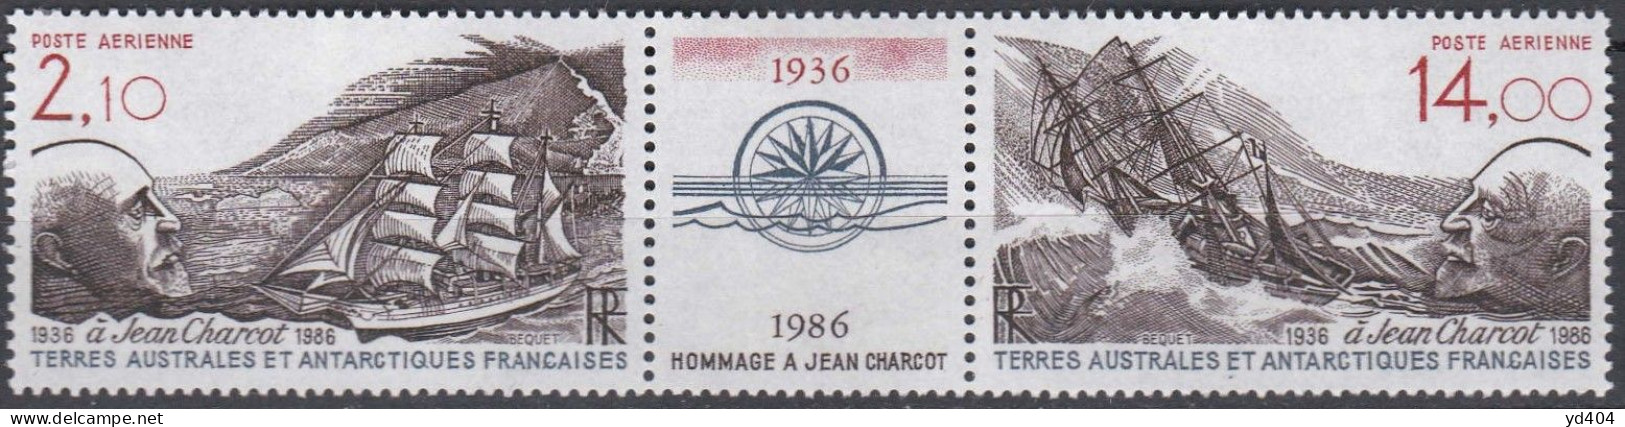 TF45B – TAAF – AIRMAIL - 1986 – JEAN CHARCOT –  SG # 214/5 MNH 8 € - Unused Stamps